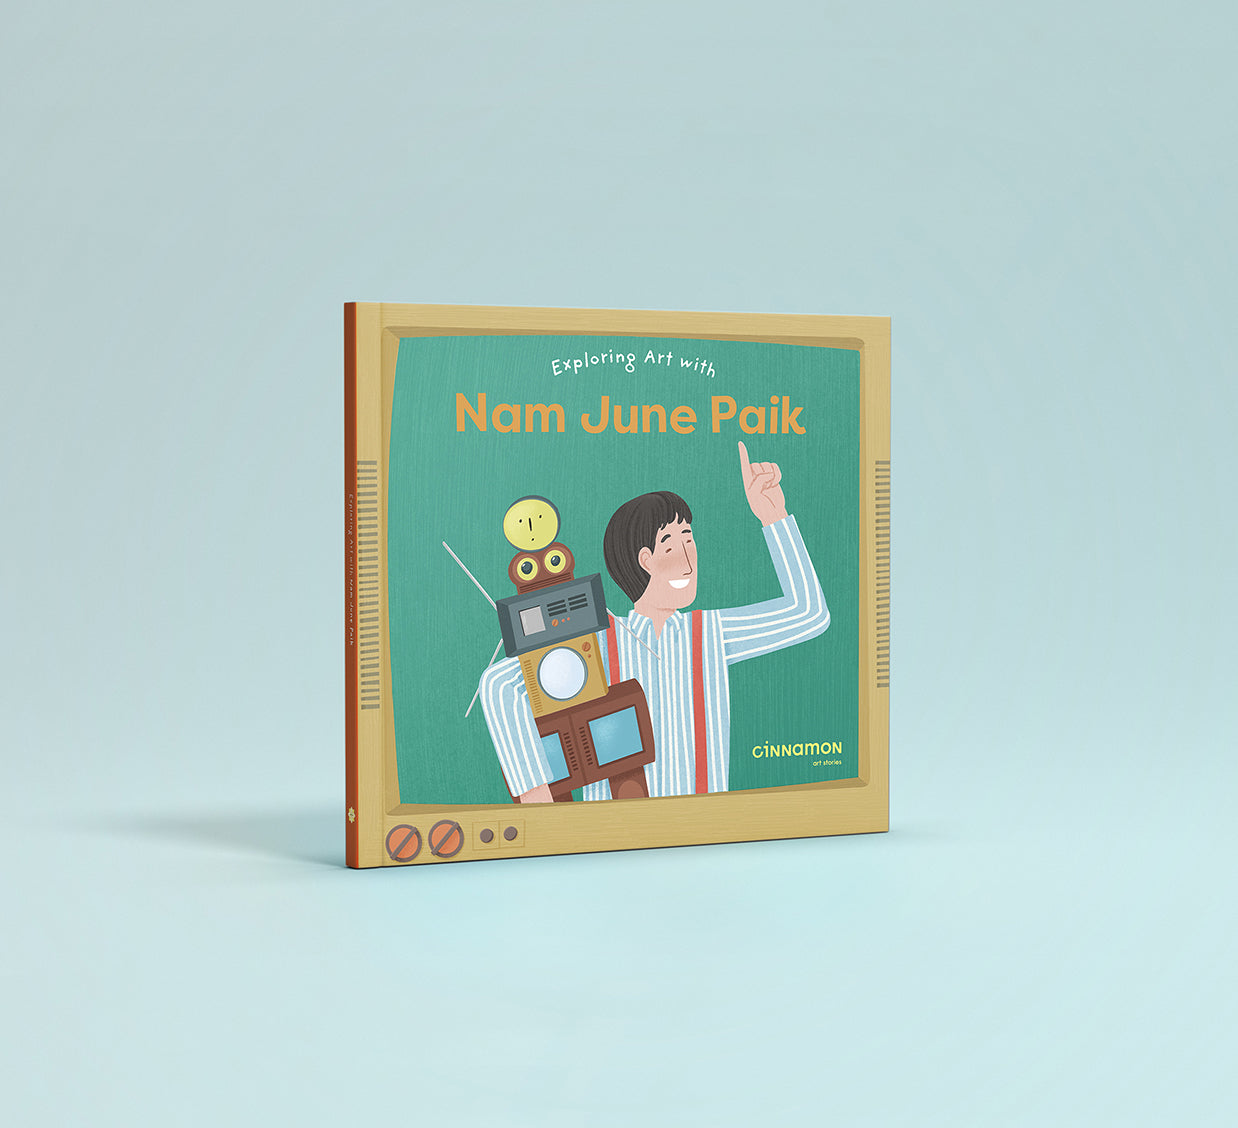 A fun and colorful read-aloud book on Korean artist Nam June Paik. Exploring Art with Nam June Paik shines a spotlight on the Korean artist's integration of electronics into art and nature. Nam June Paik was a pioneer in creating video art and experimenting with new mediums in the 1970s.    Reading level: 5 to 8. Created for children under 12 years old.